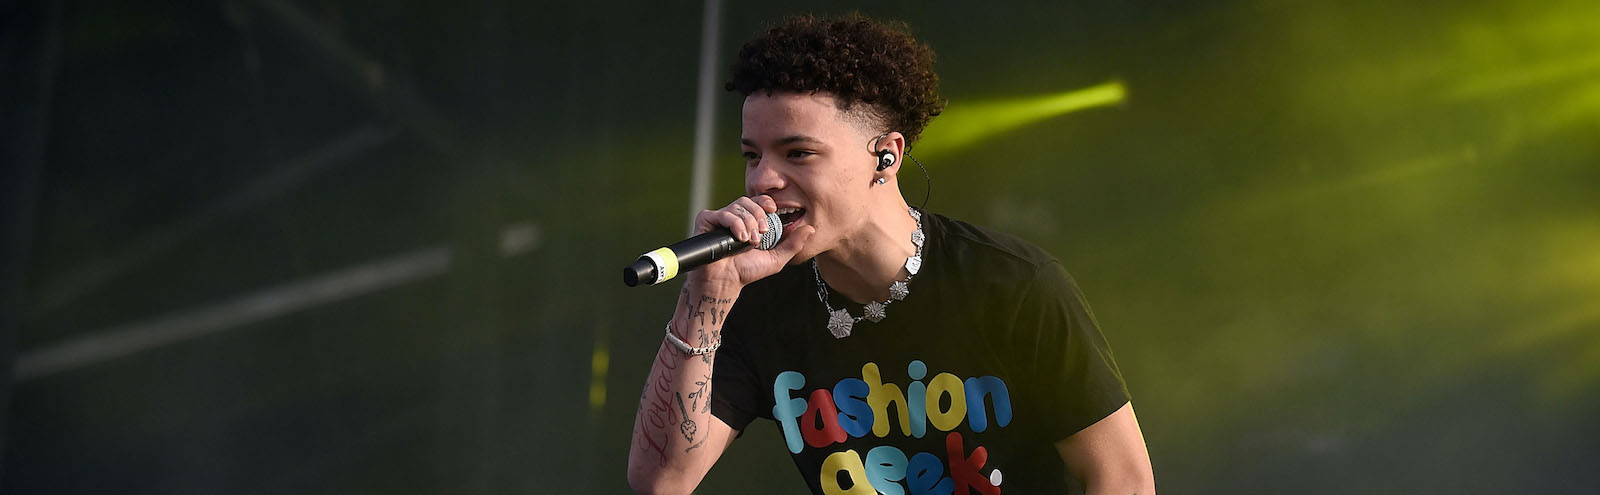 Lil Mosey Was Reportedly Ordered To Stay Away From His Accuser Ahead Of His Rape Trial